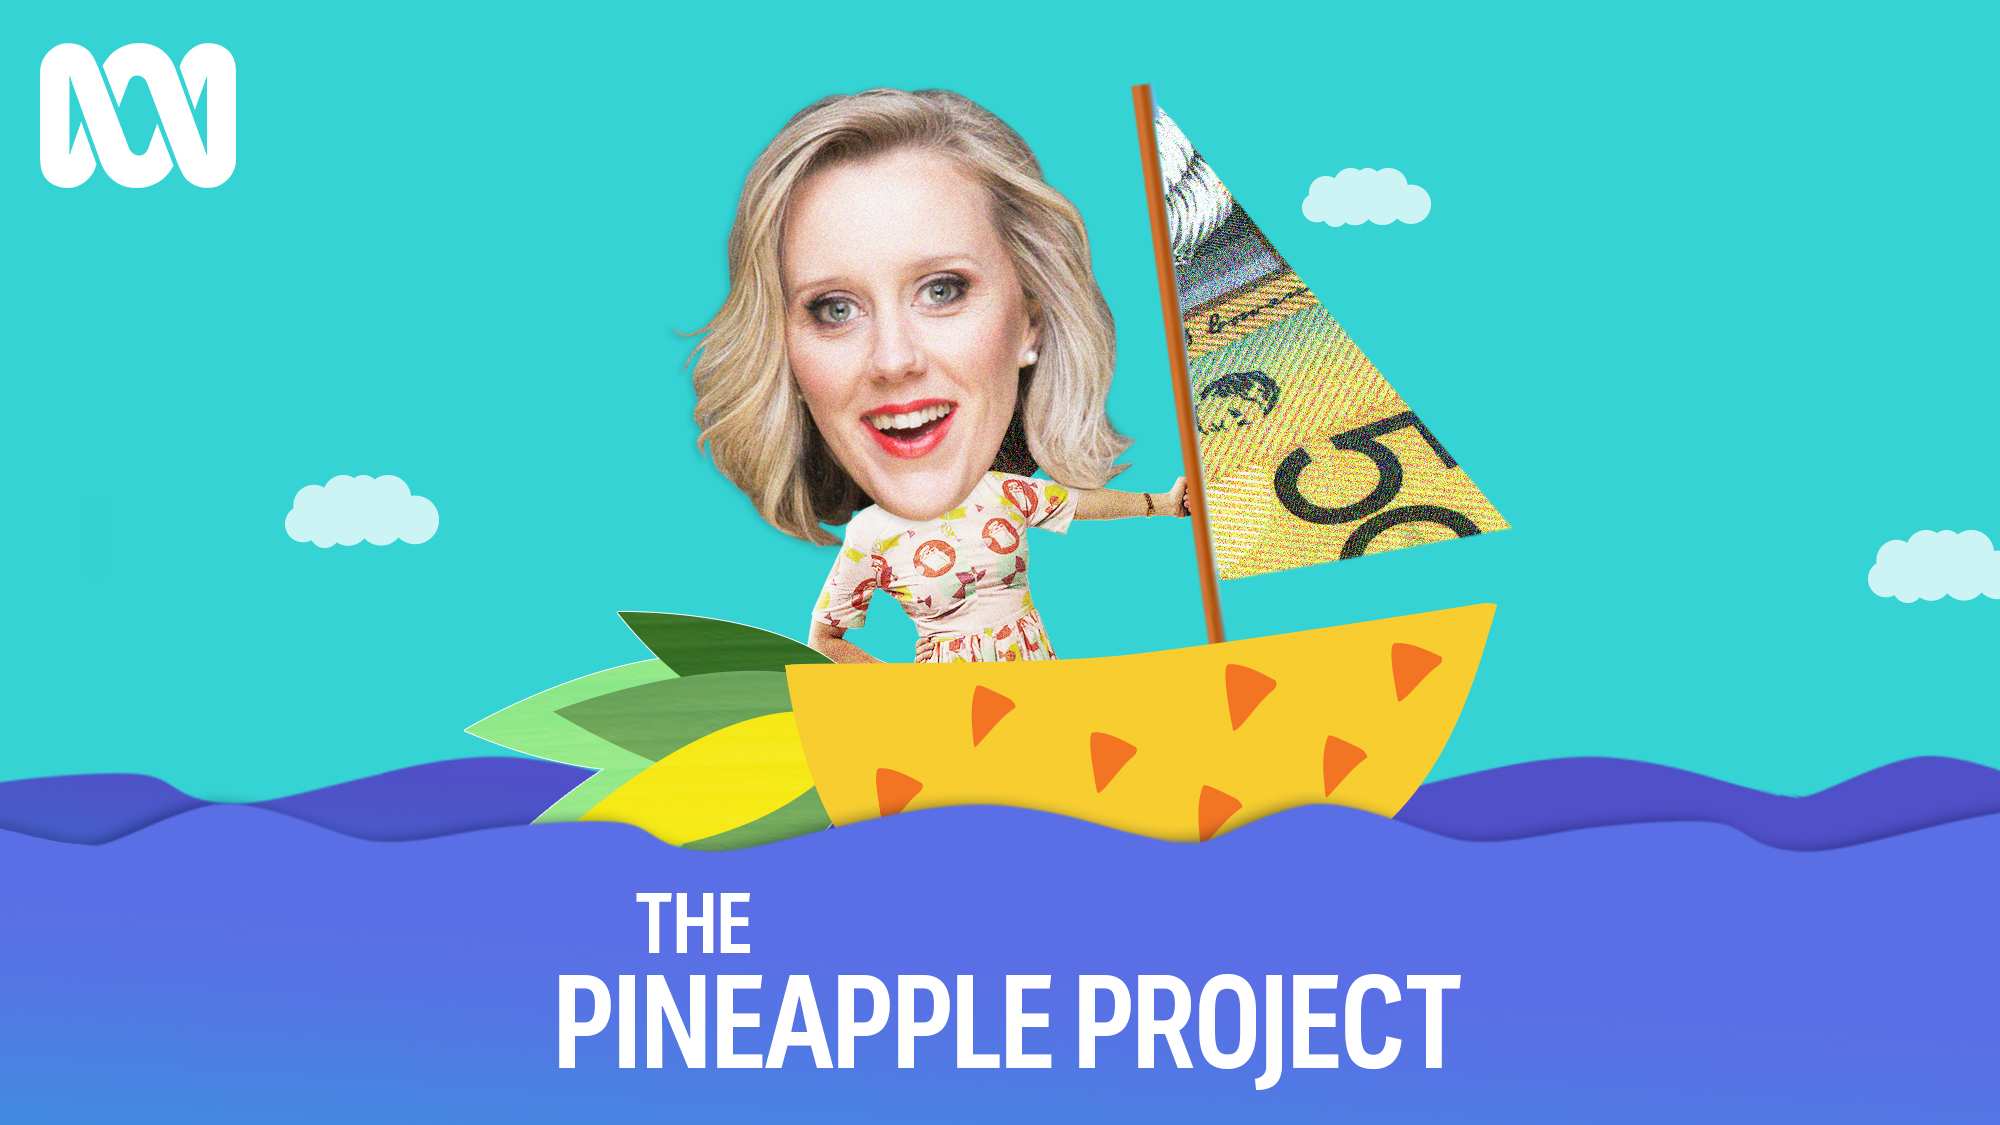 INTRODUCING — The Pineapple Project